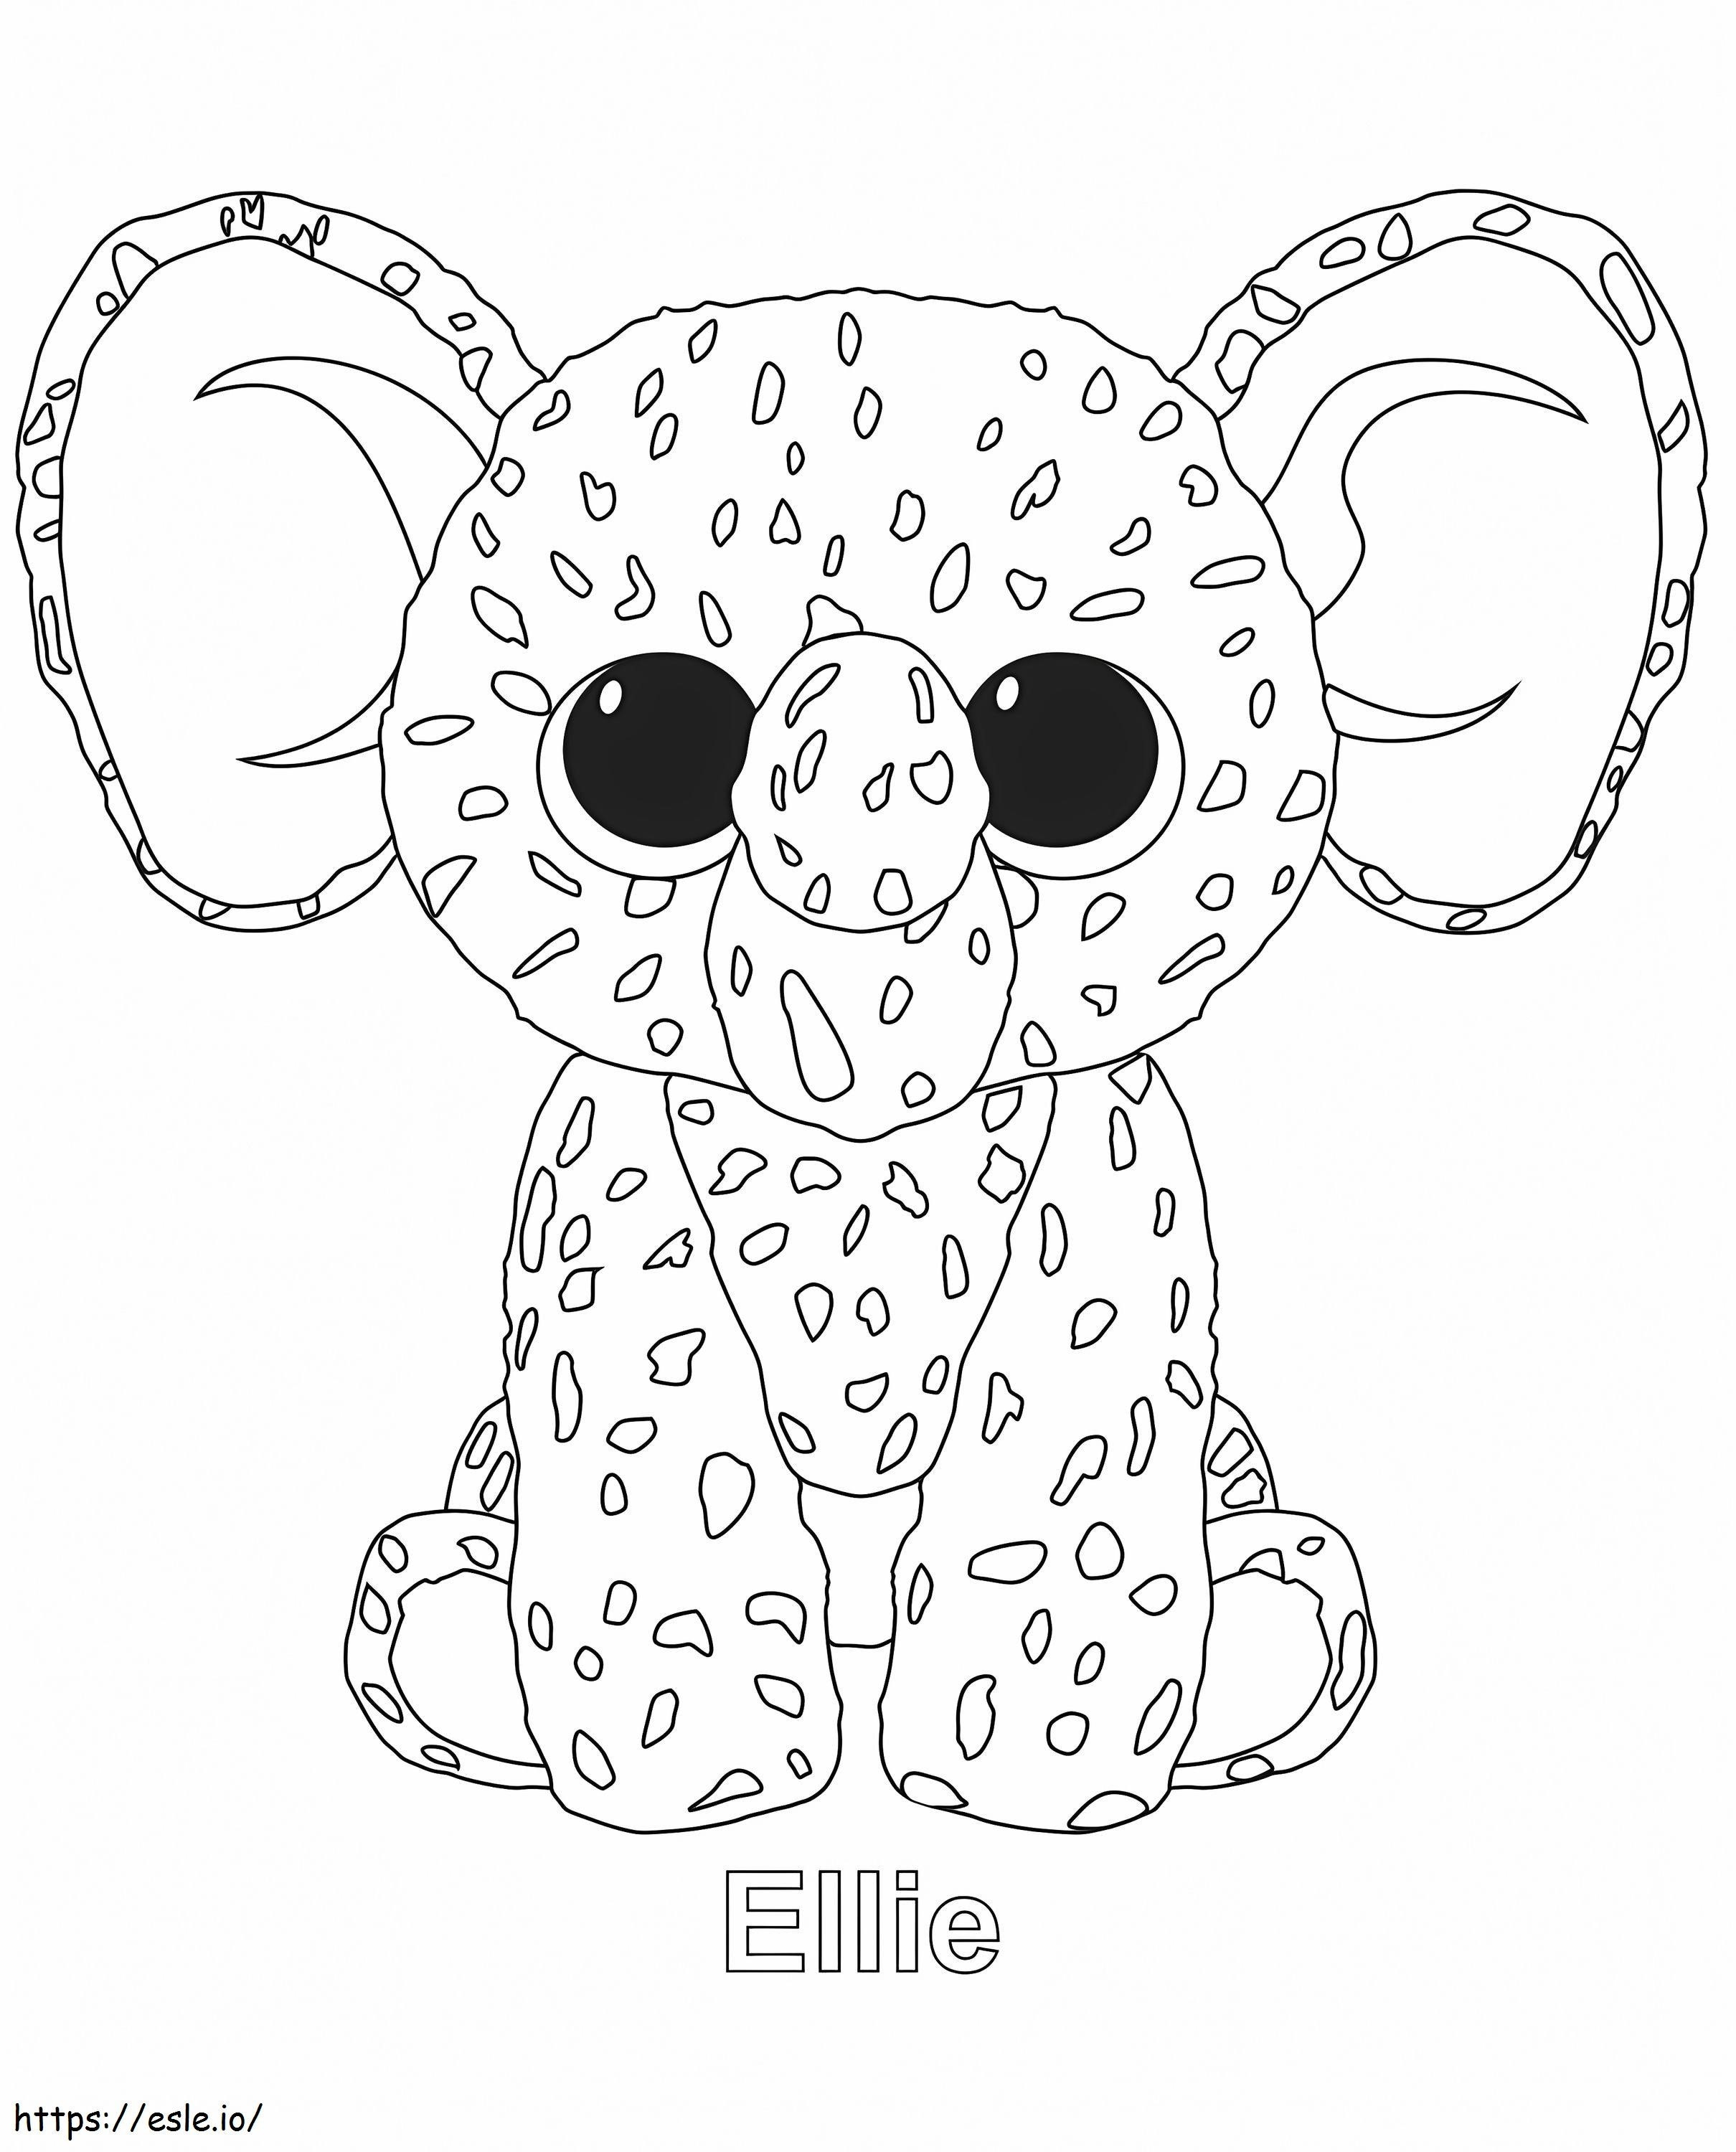 1584153914 Beanie Boo Coloring Book Coloringages Ellie Boorintable 1469293272Ellie Monkey Birthdays Free Torint Ty Remarkable Pages Books For coloring page